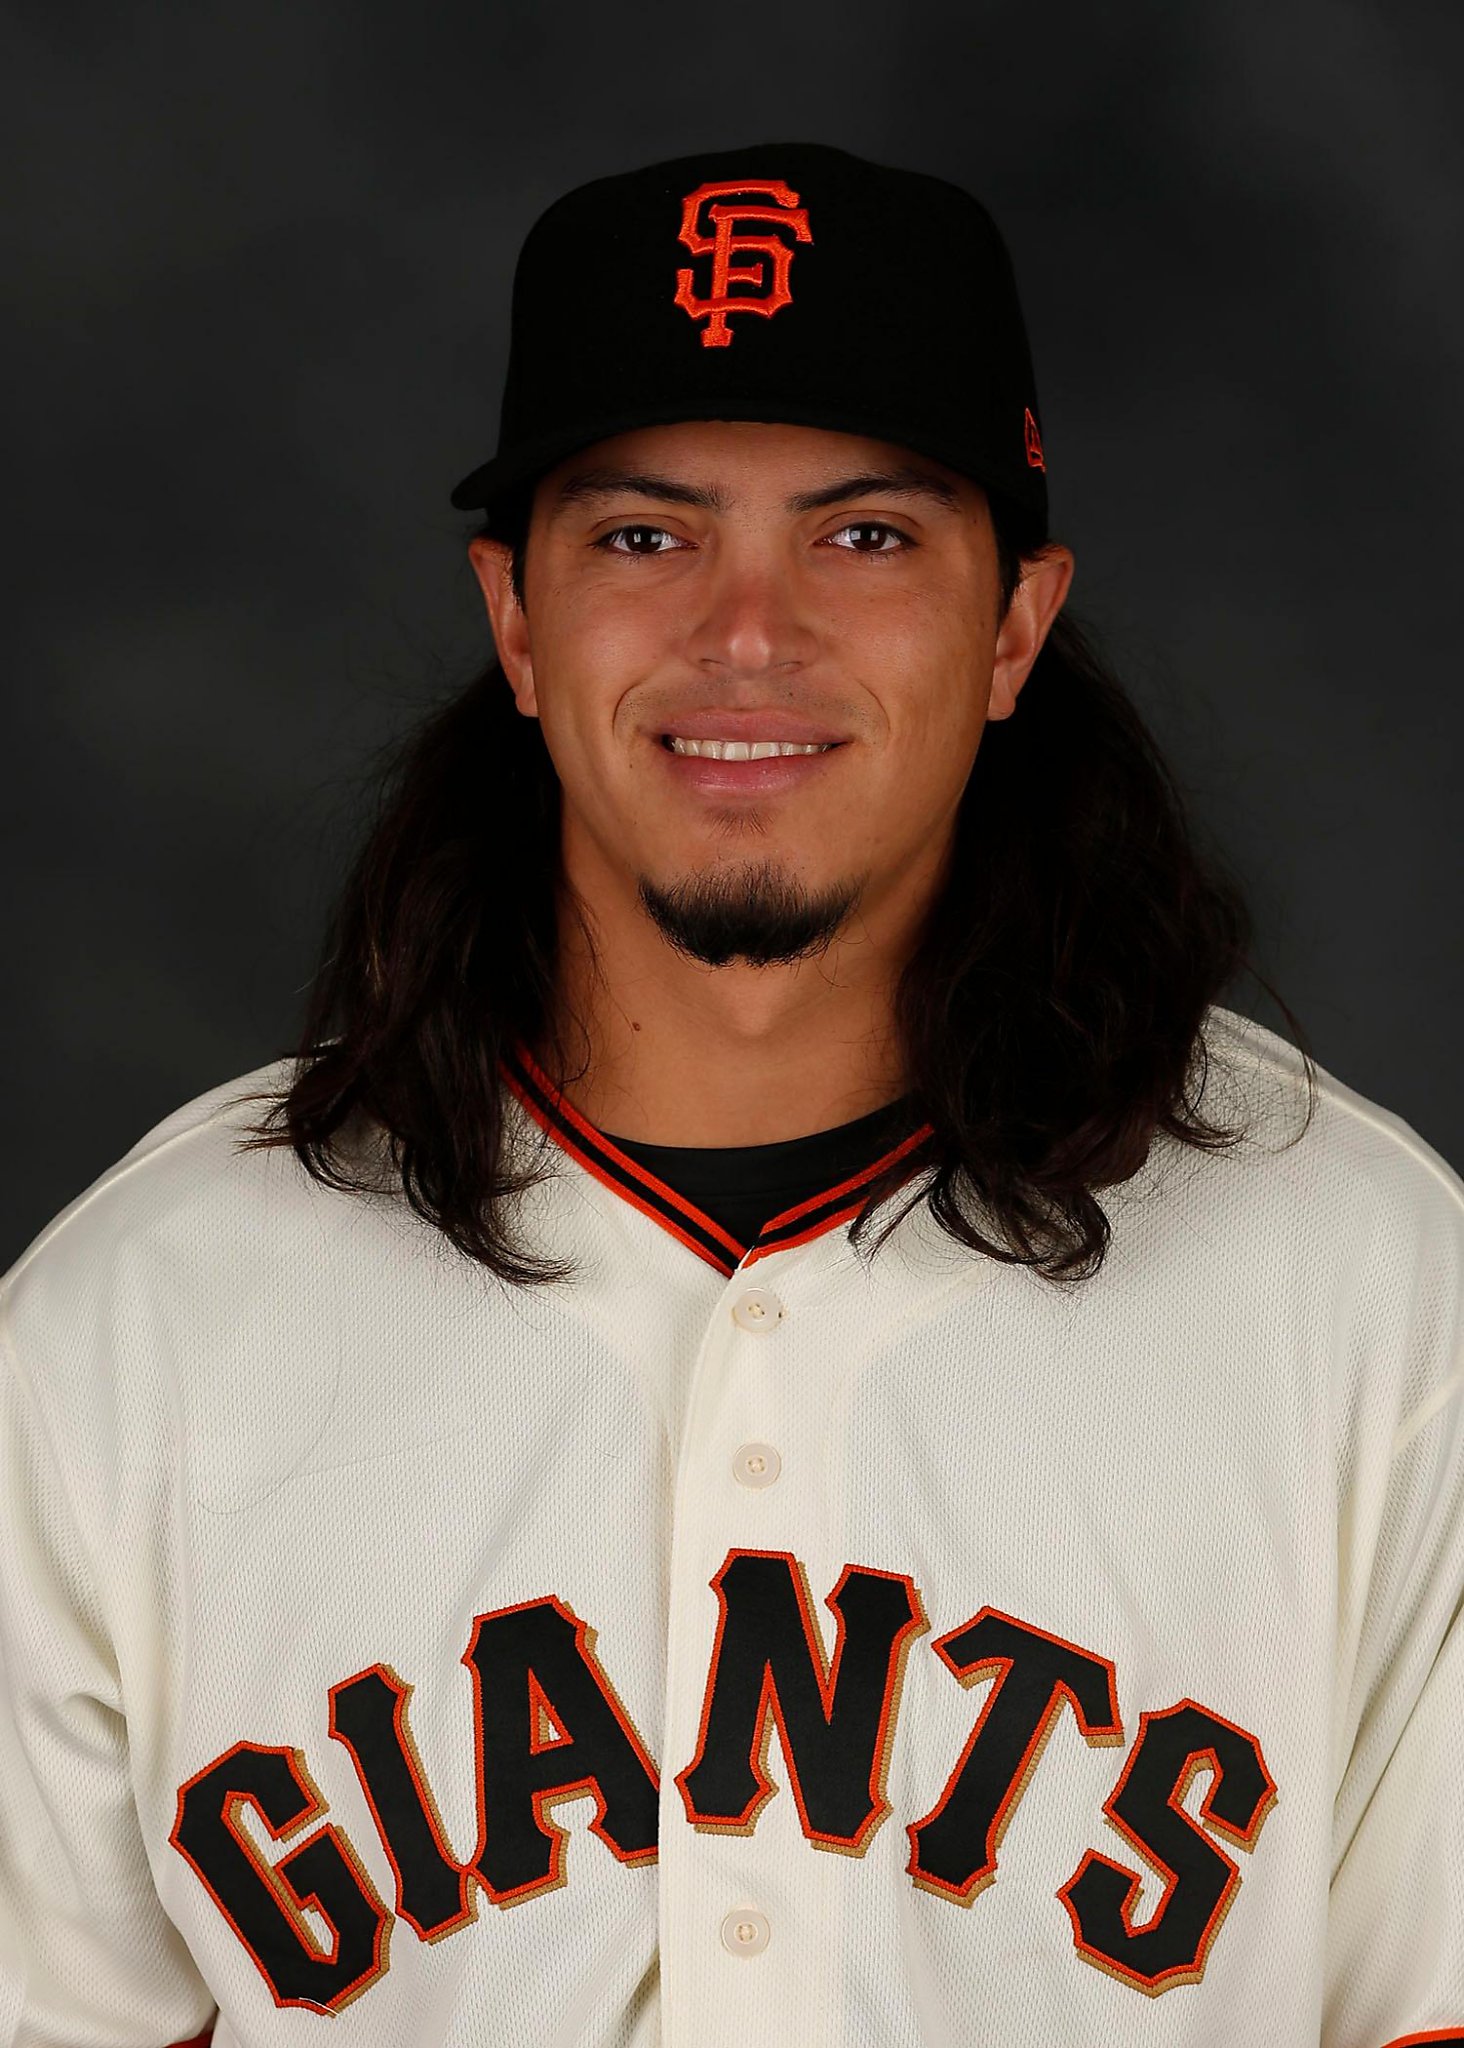 The Giants called up Dereck Rodriguez, son of Hall of Famer Pudge